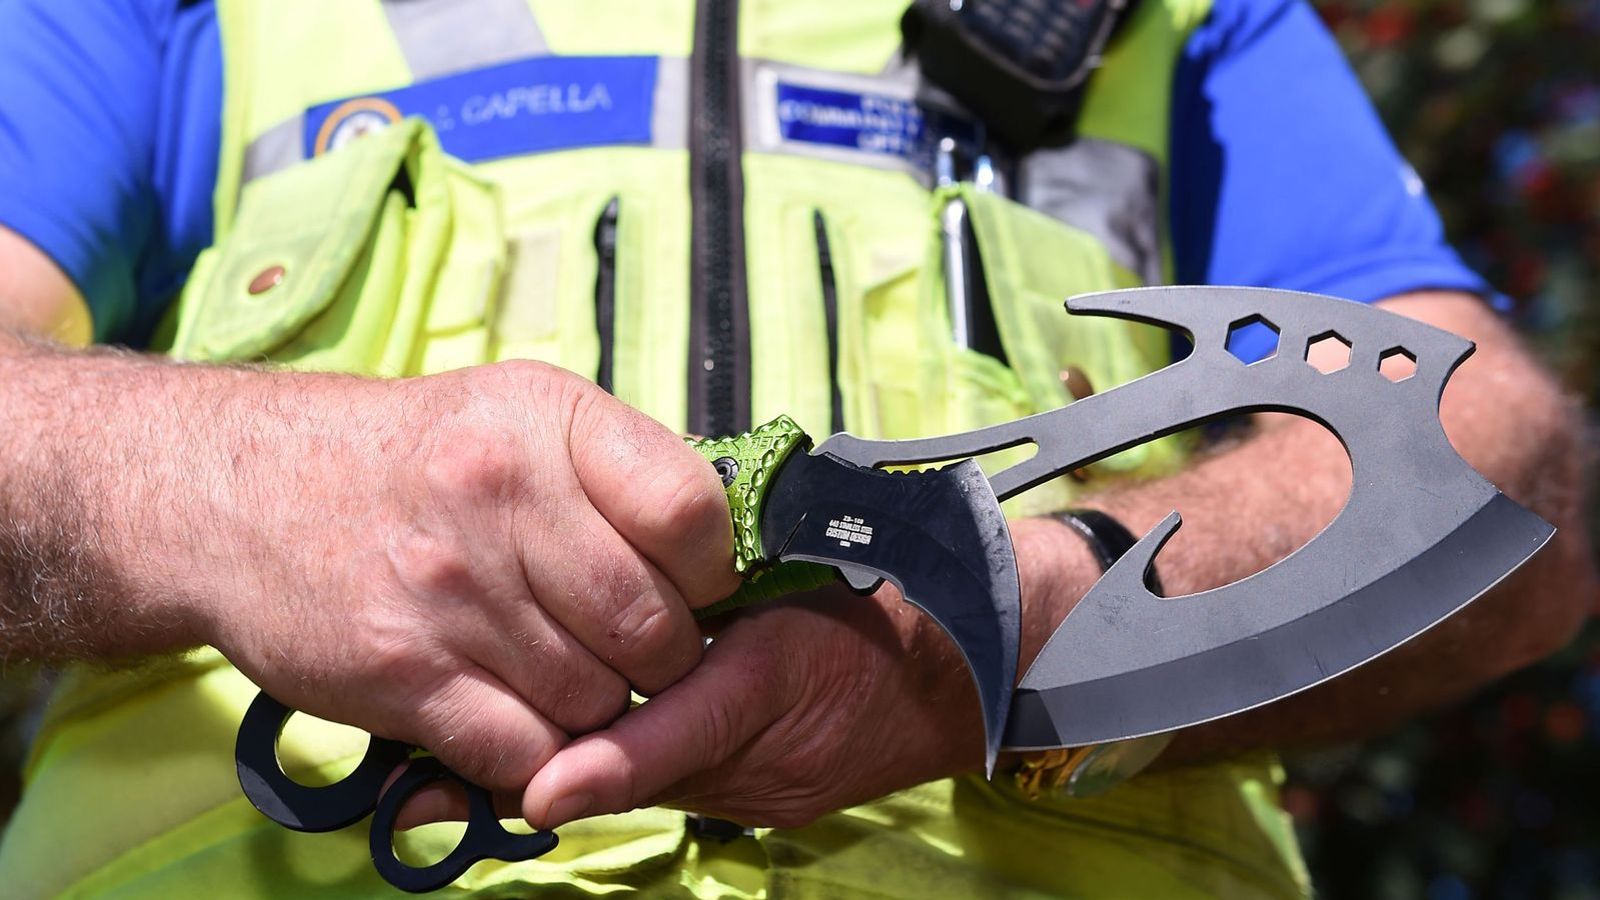 Police to get powers to seize and destroy machetes and zombie knives in further crackdown